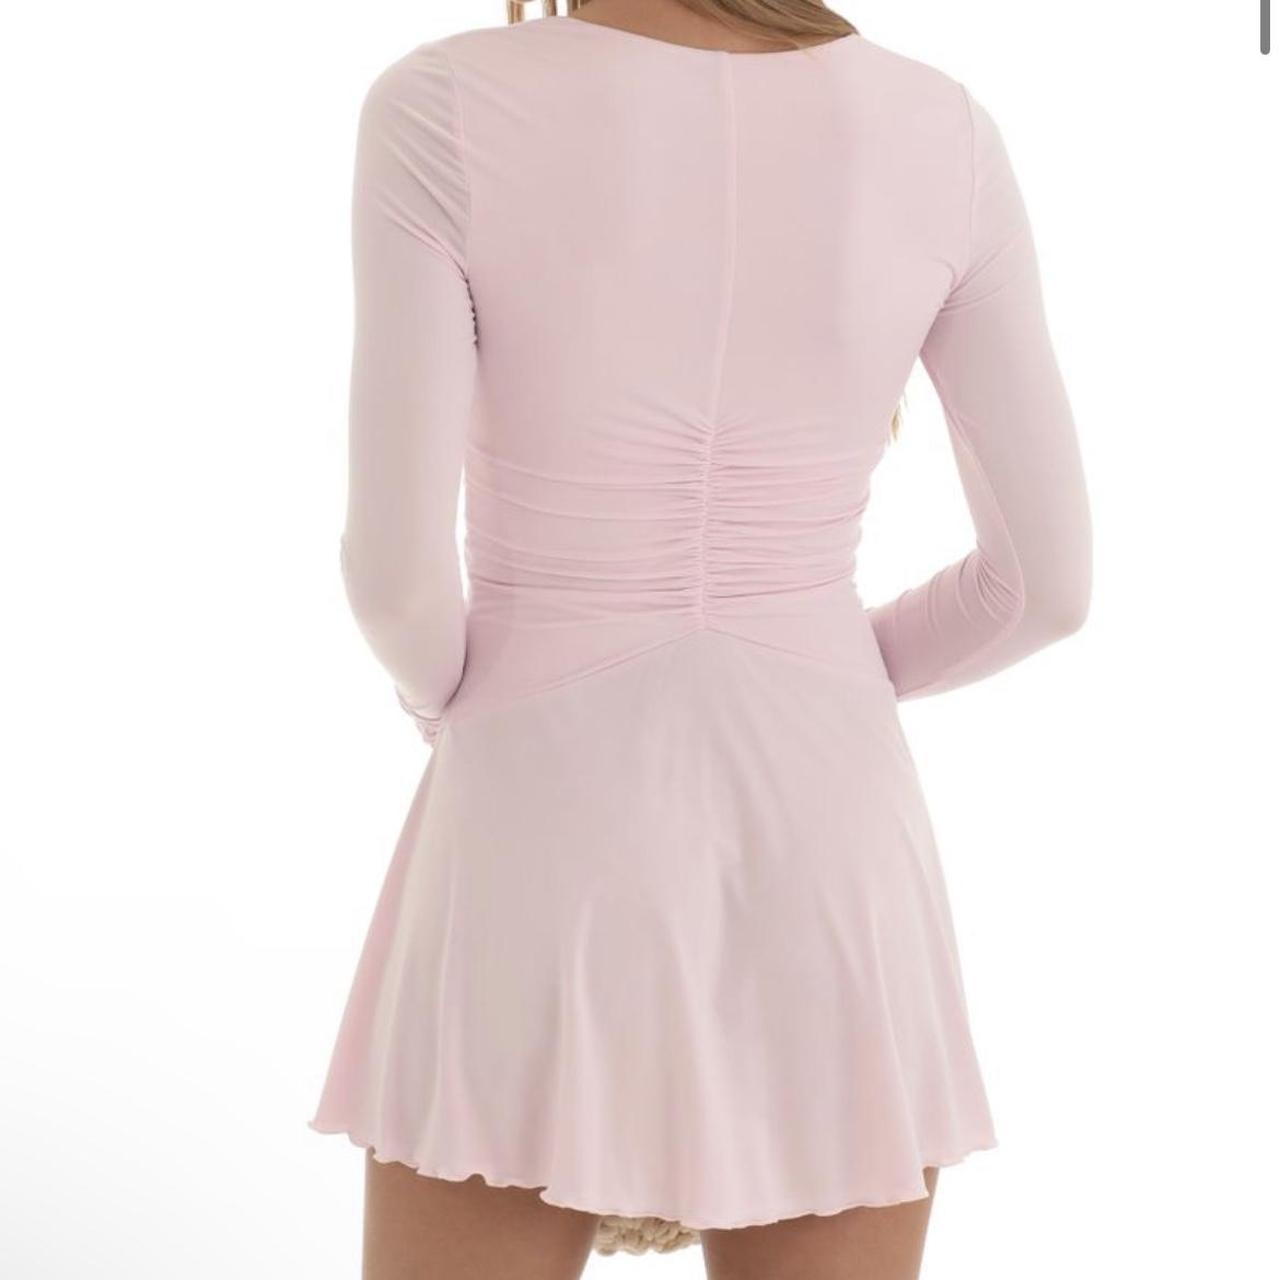 Lucy in the Sky Women's Pink Dress (5)